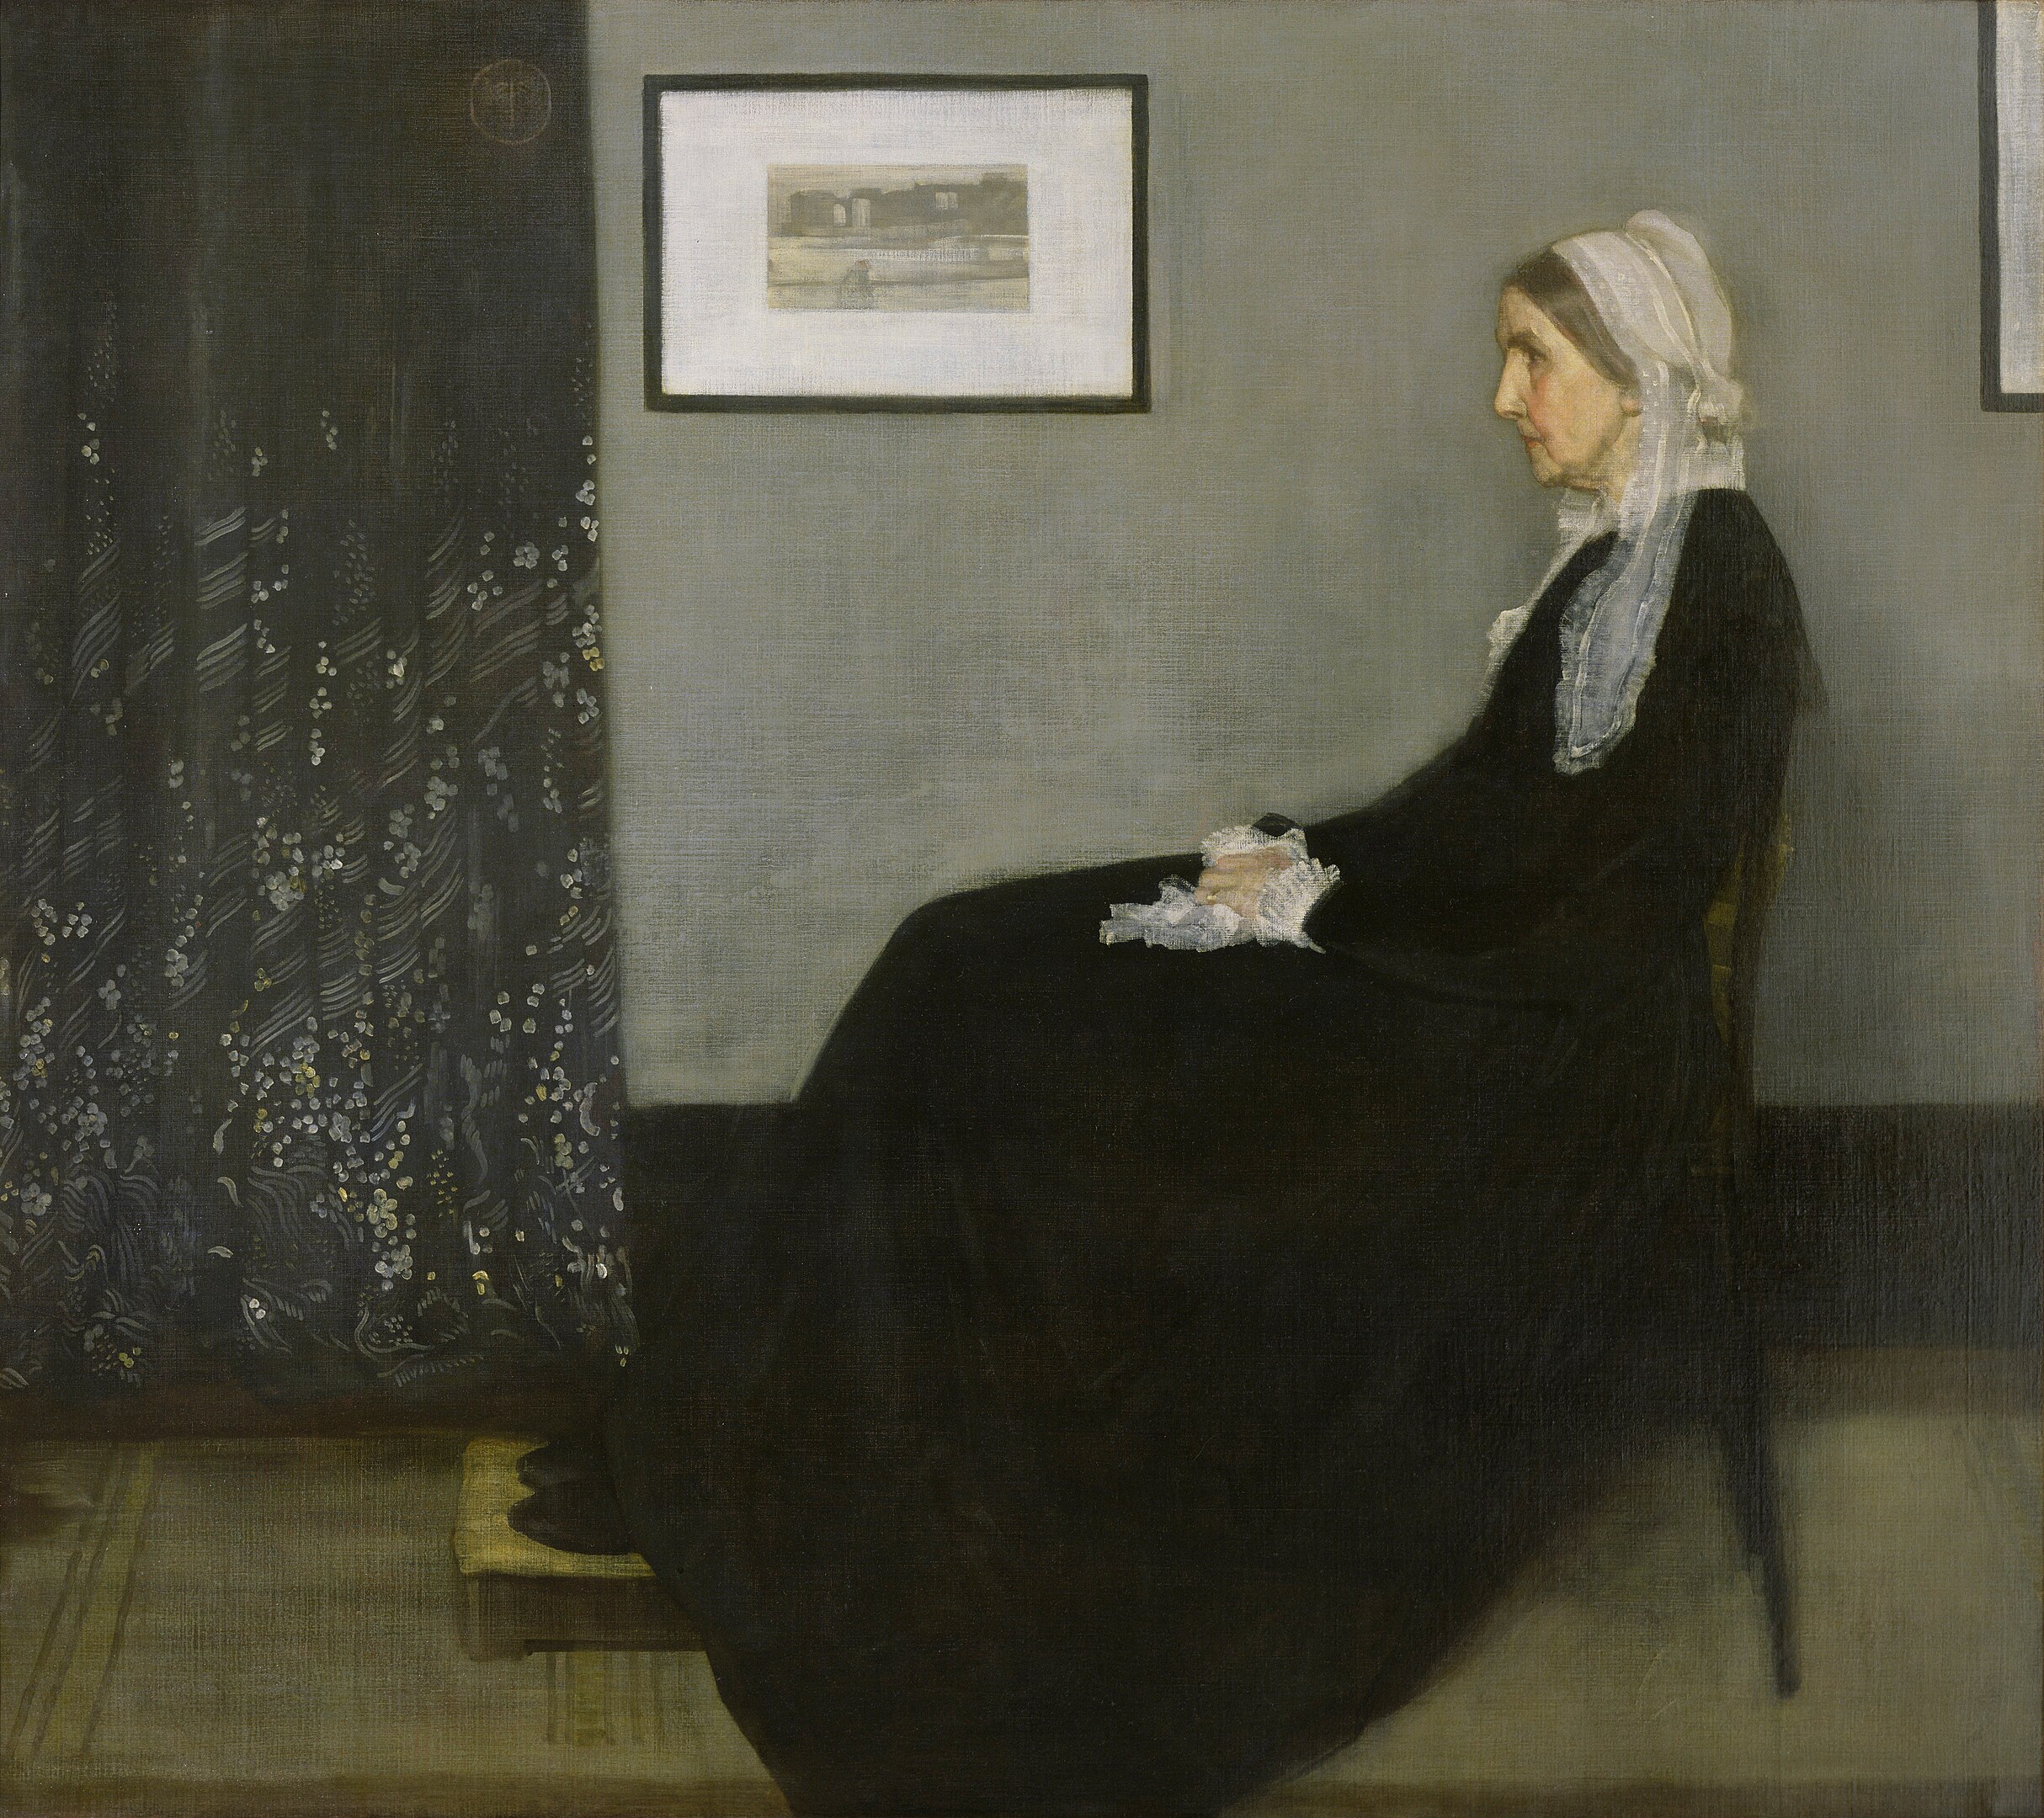 La madre di Whistler by James Abbott McNeill Whistler - 1871 - 144,3 cm × 162,4 cm Musée d'Orsay